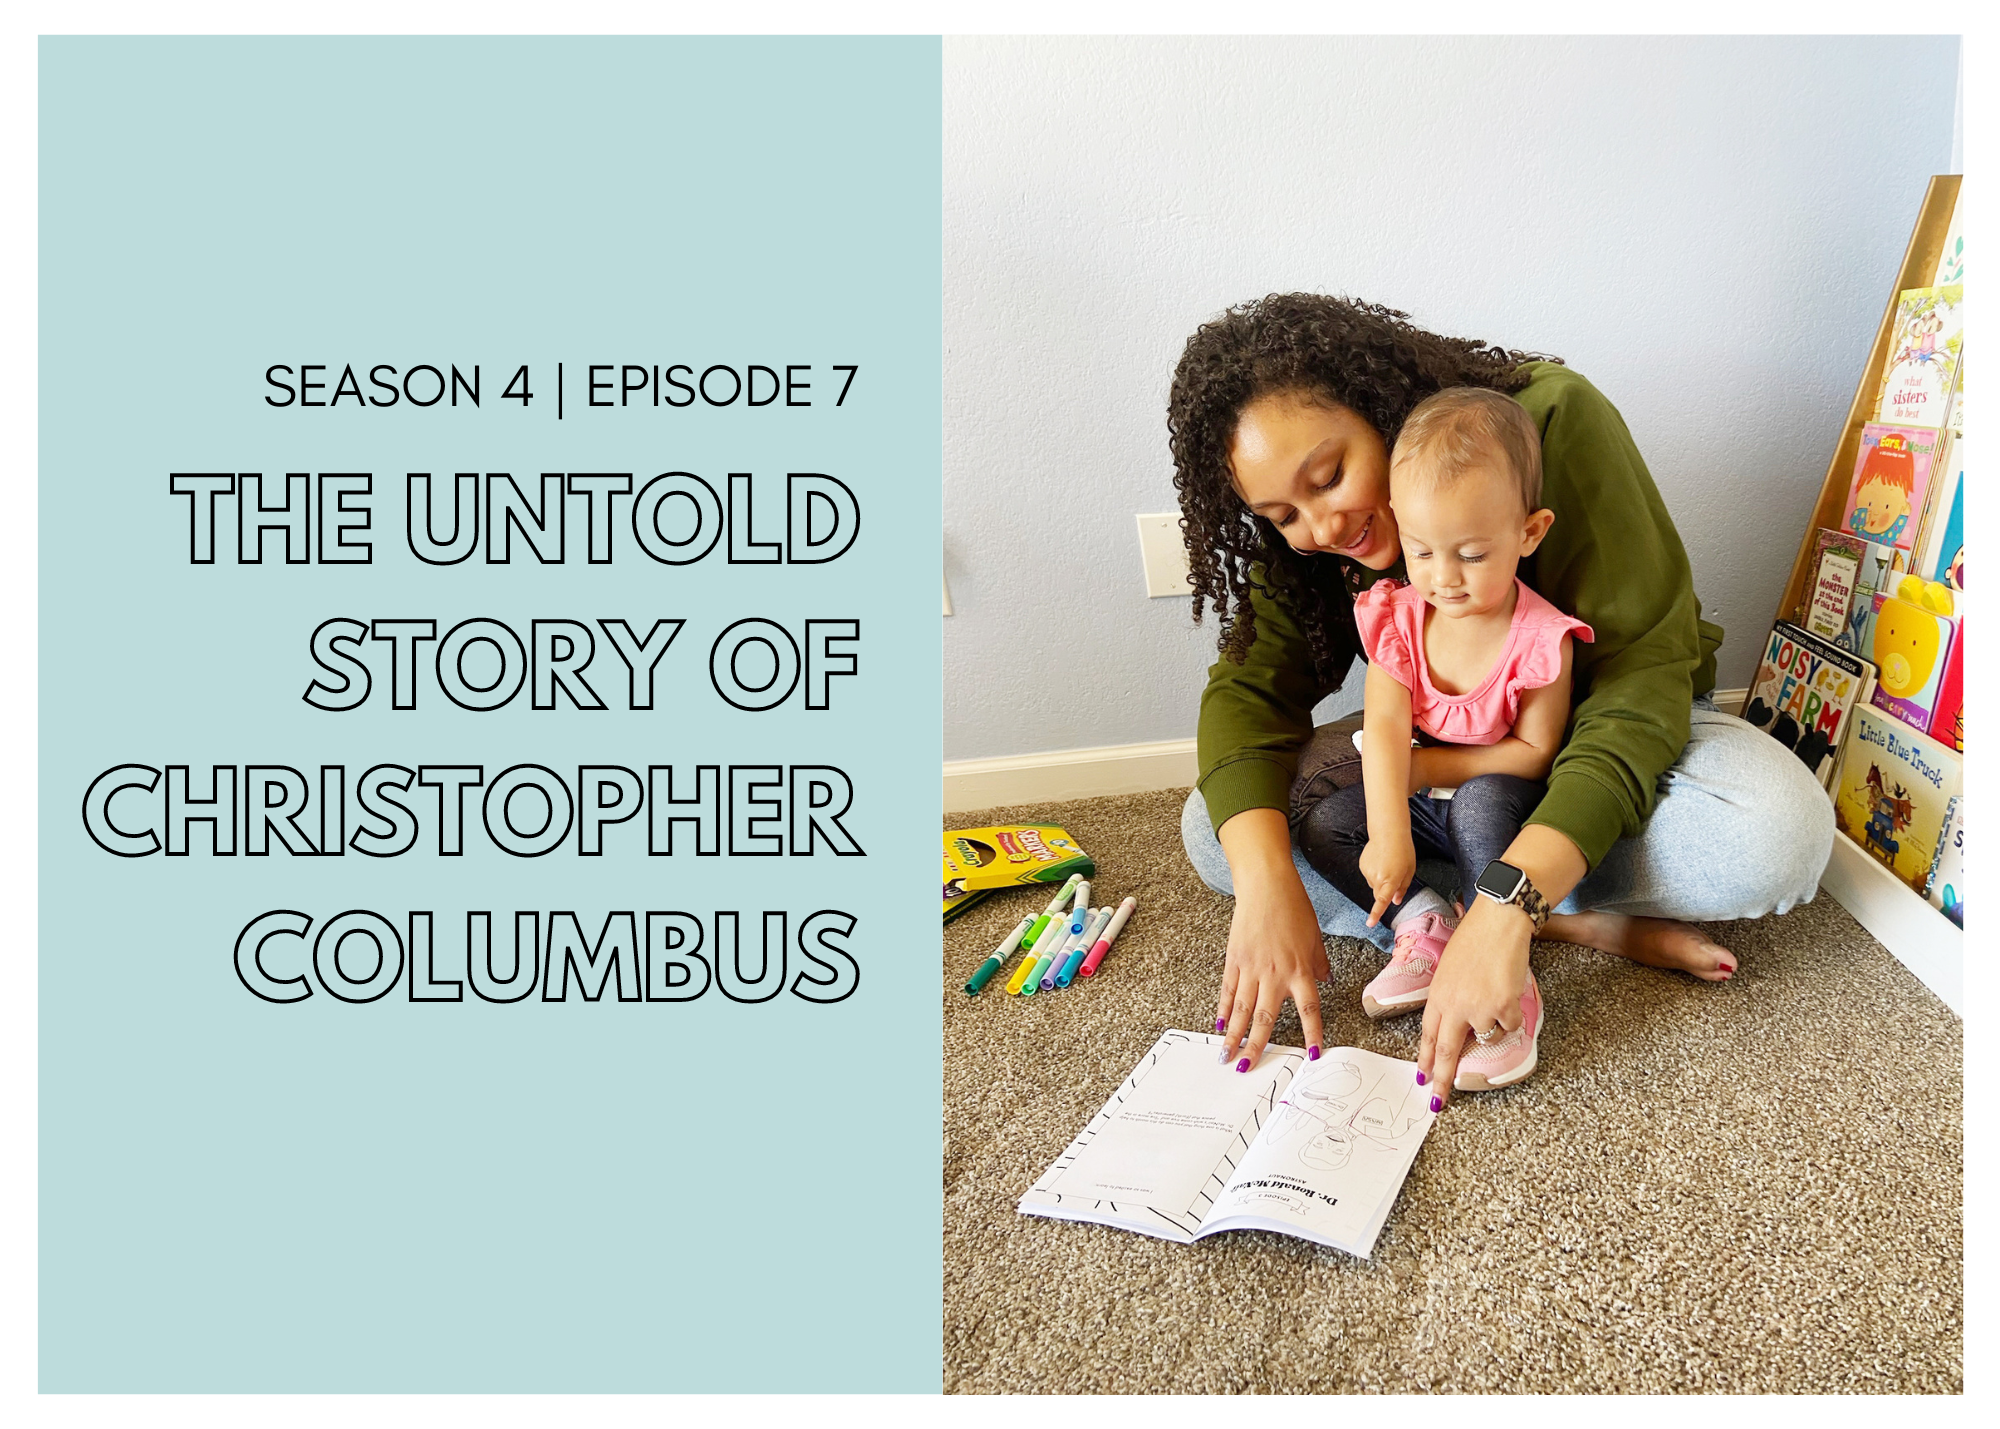 The Untold Story of Christopher Columbus